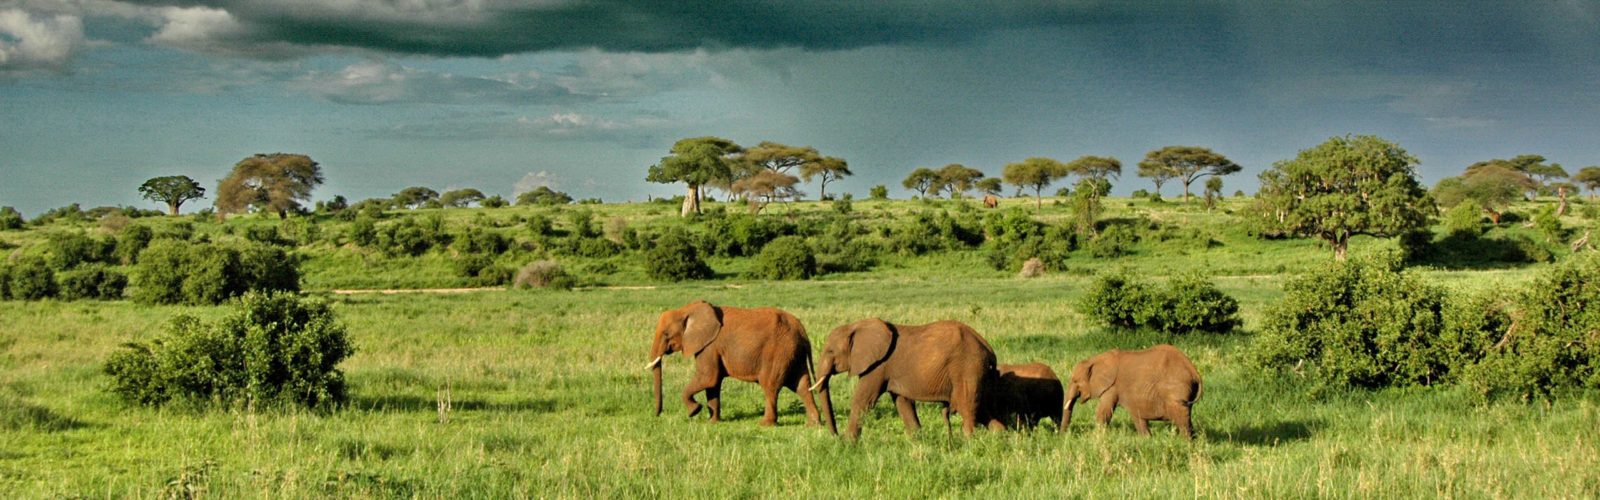 Olivers-Camp-Elephants-under-dramatic-clouds